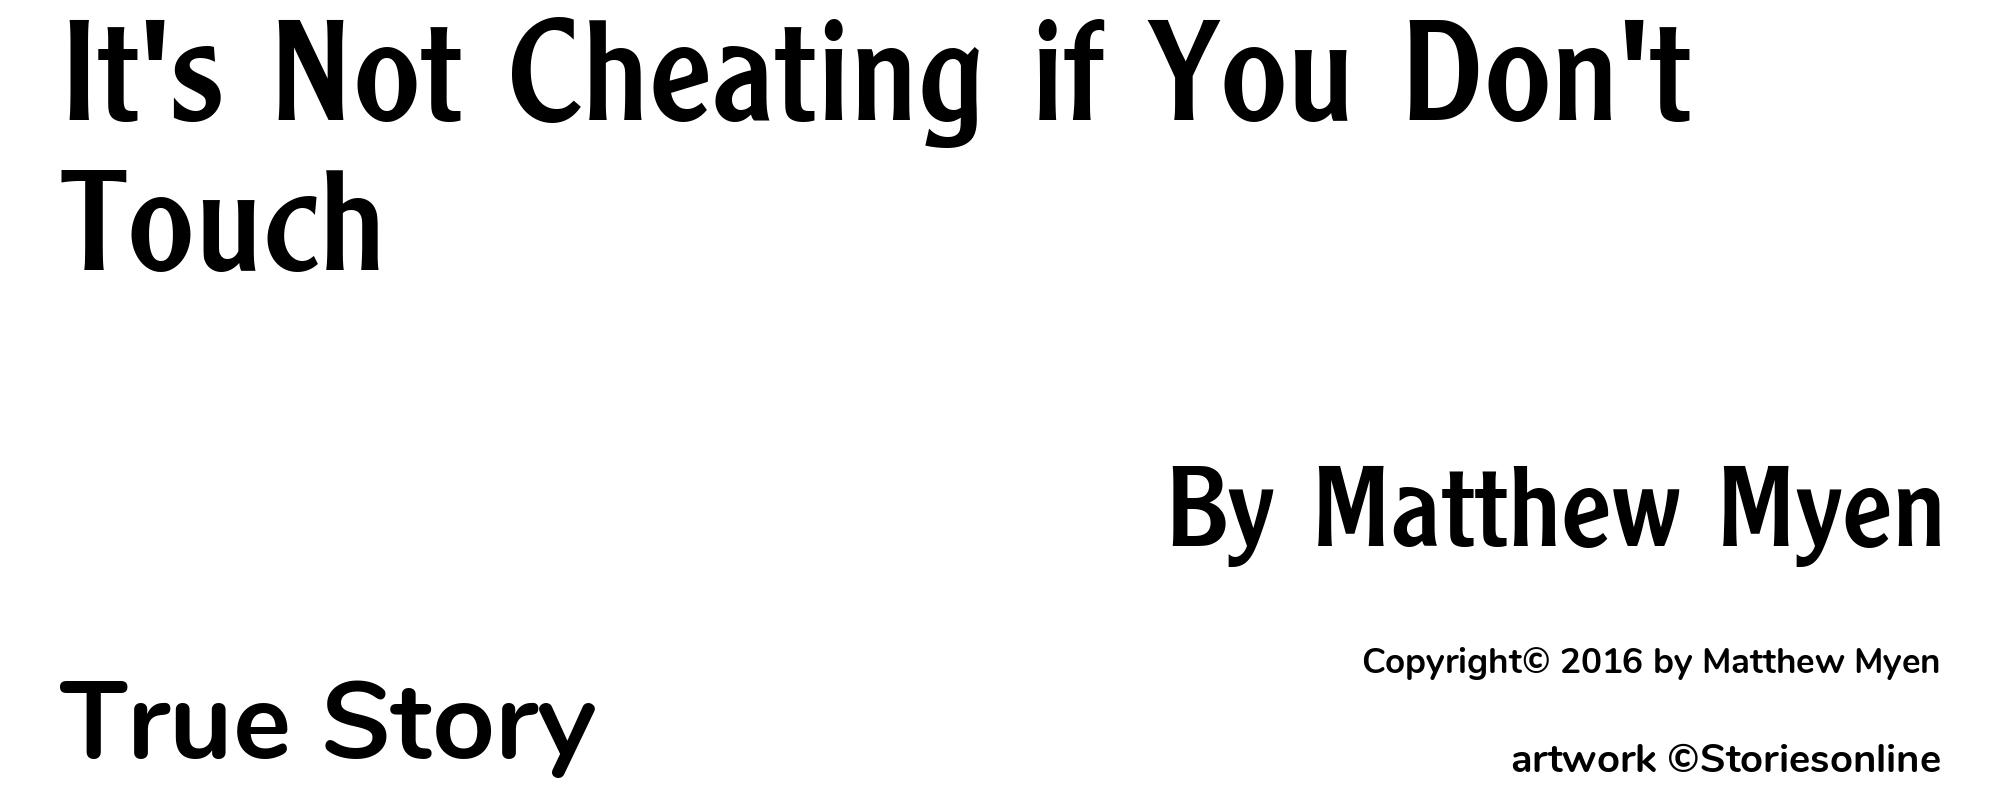 It's Not Cheating if You Don't Touch - Cover